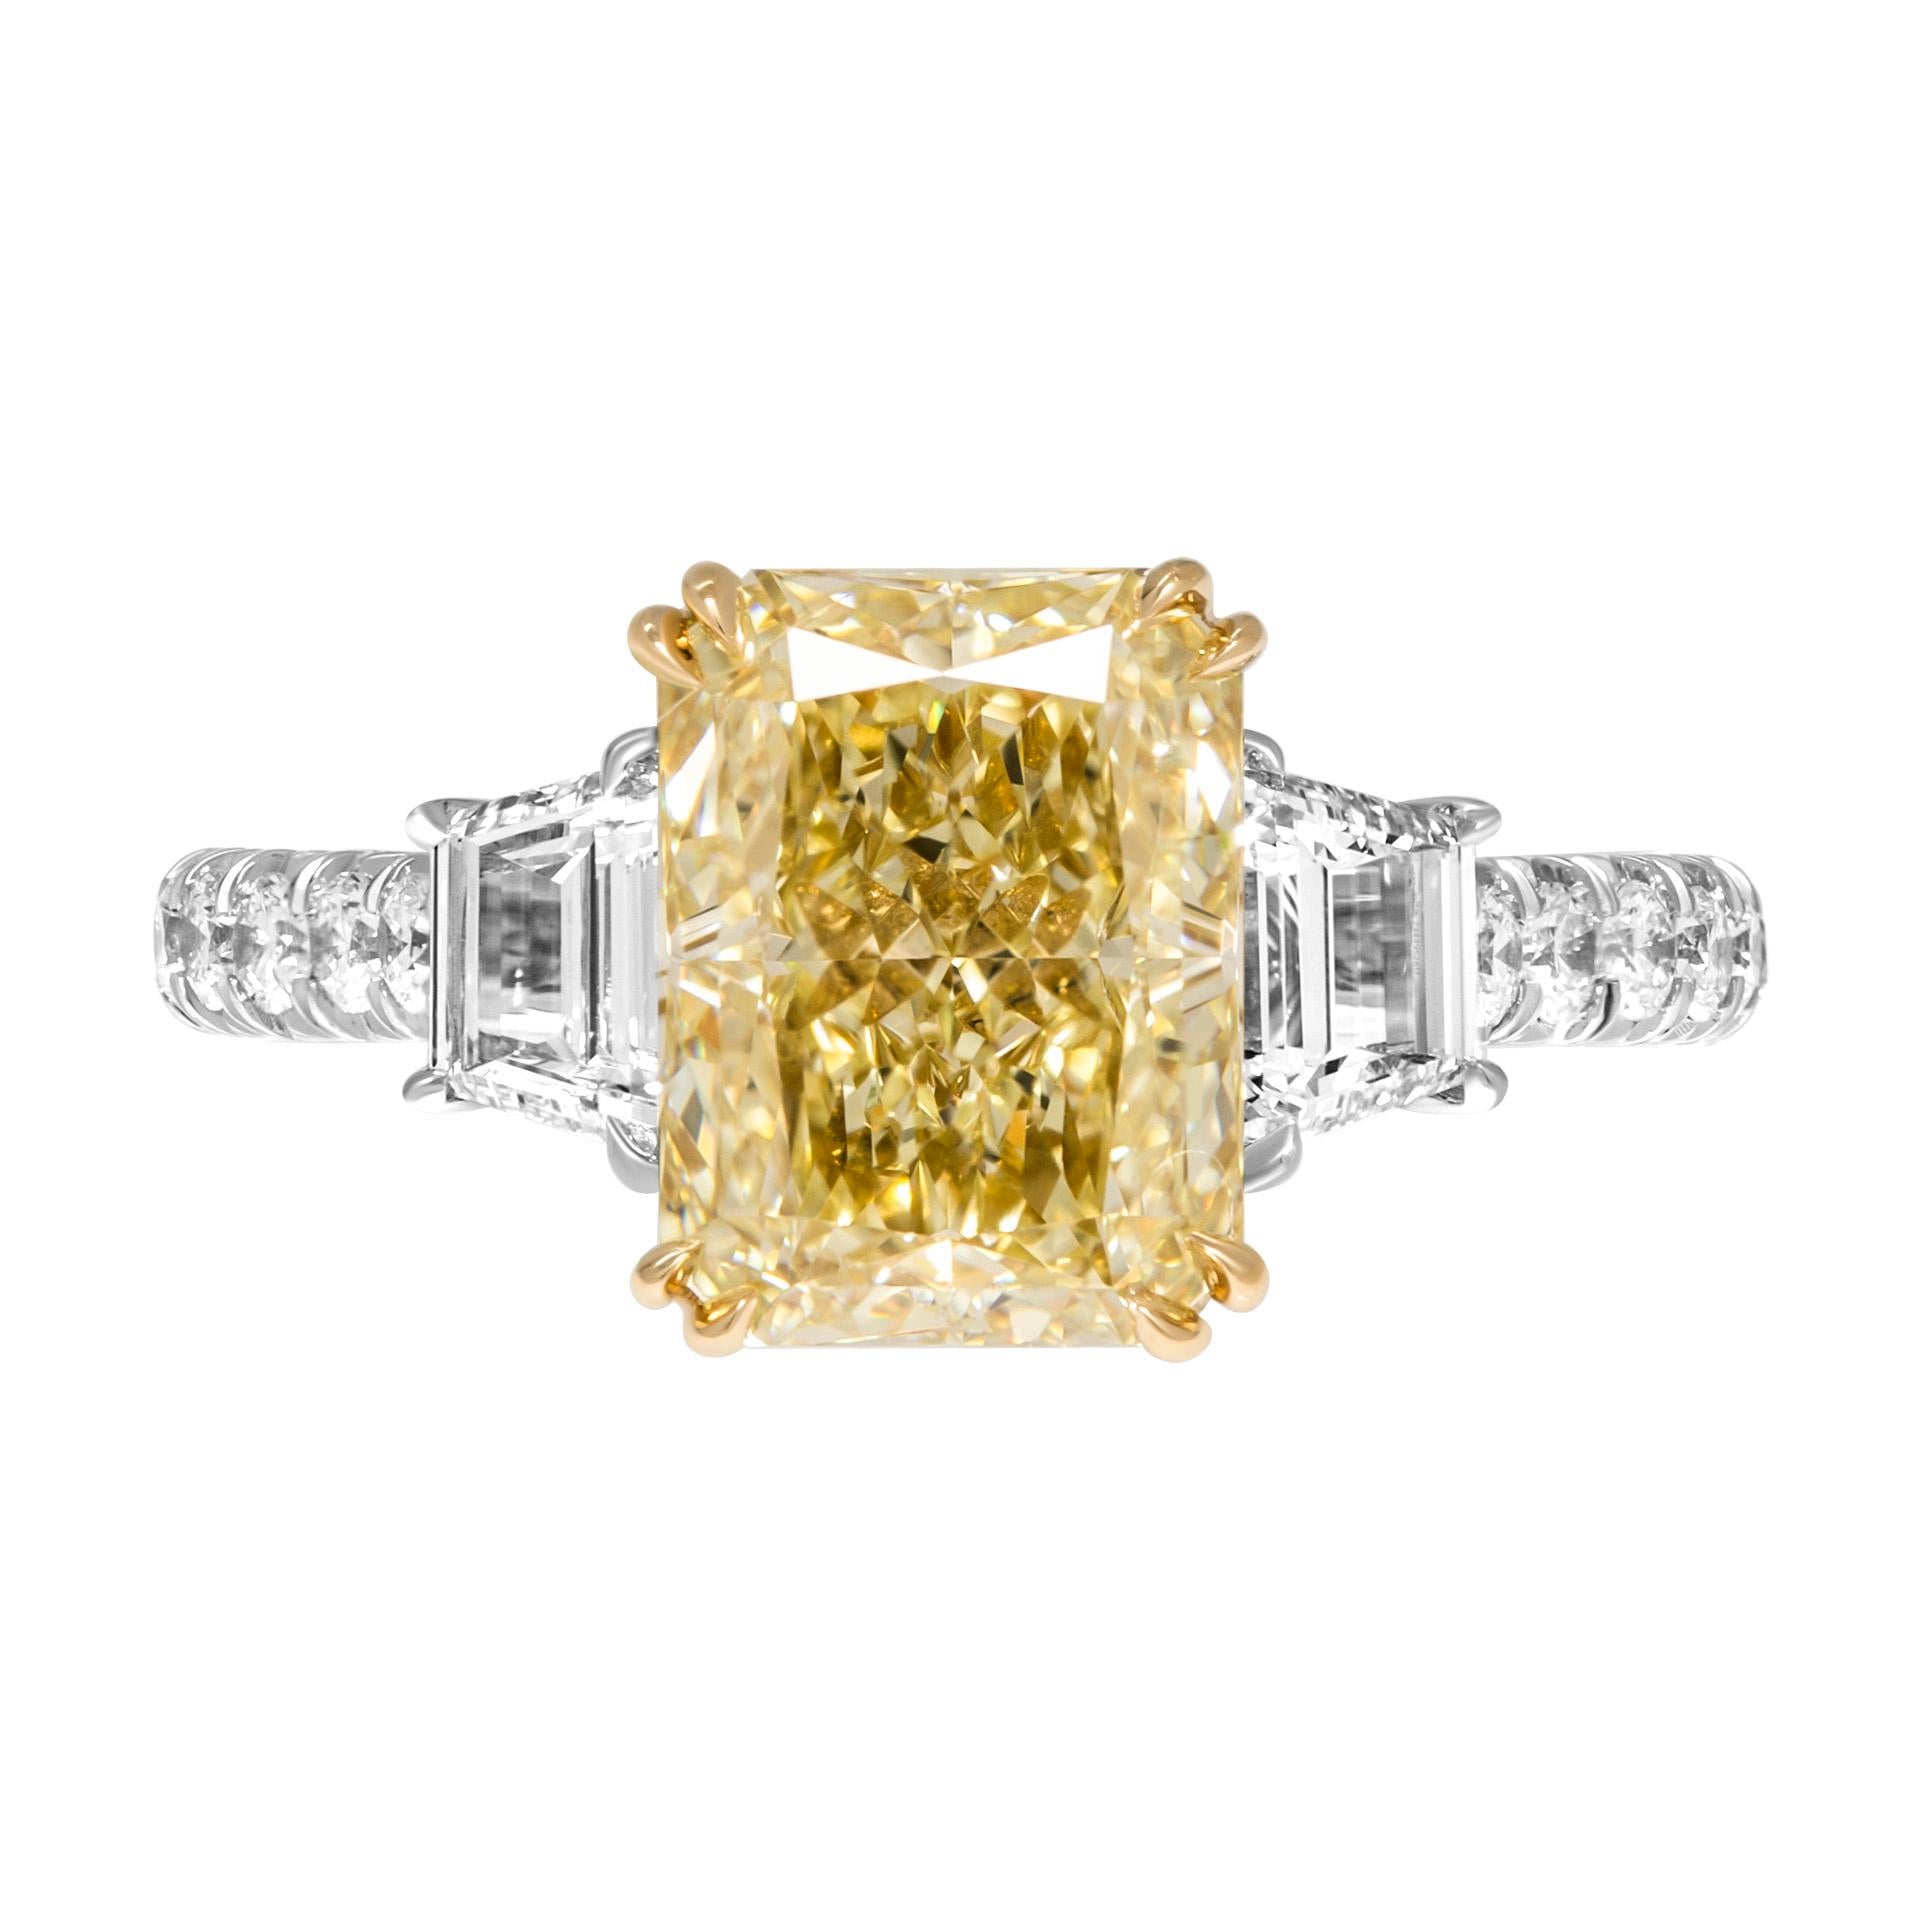 GIA Certified Three stone rings in 18k Yellow Gold & Platinum 
Diamond shank, double claw prongs on center stone, diamond wrap on center stone head
Center: 3.01ct Fancy Light Yellow Even VS2 Radiant Shape Diamond GIA#2225857282 
Two side stones: